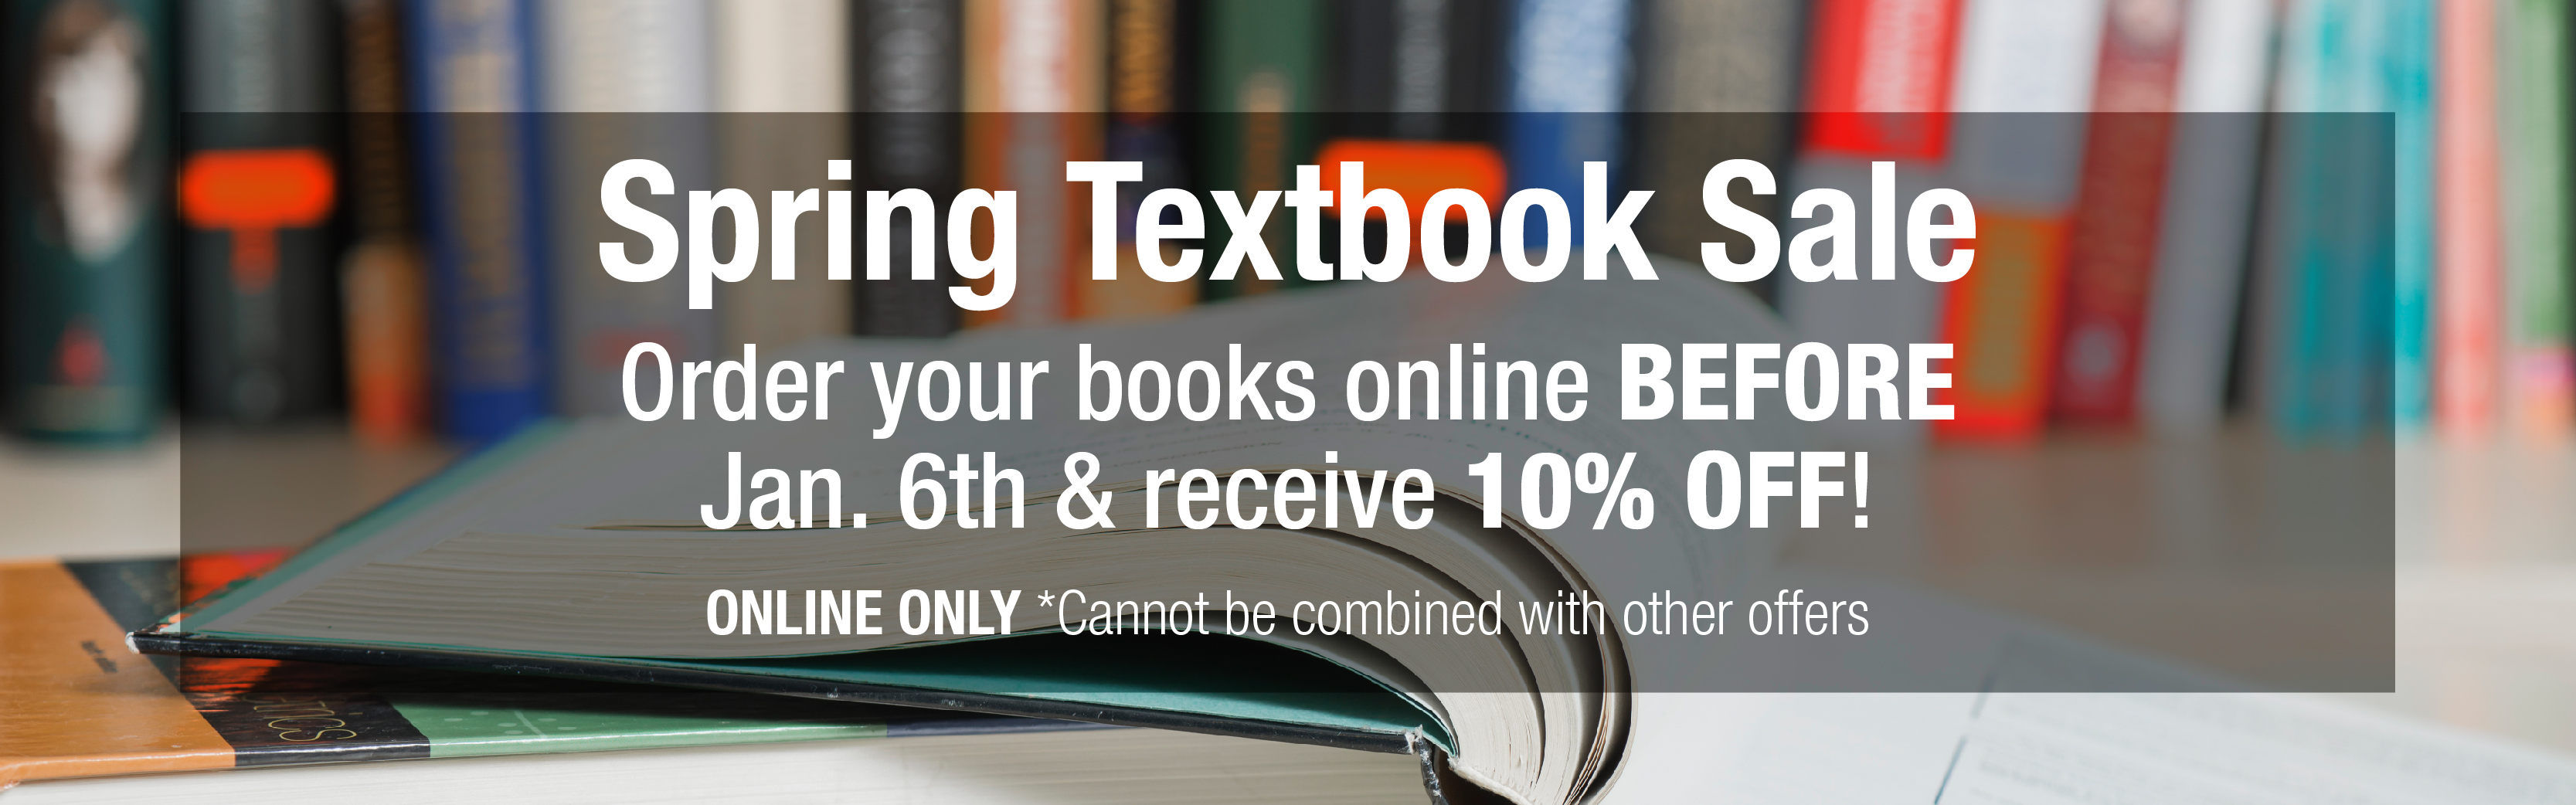 Spring Textbook Sale. Order your books online before January 6th and receive 10 percent off.